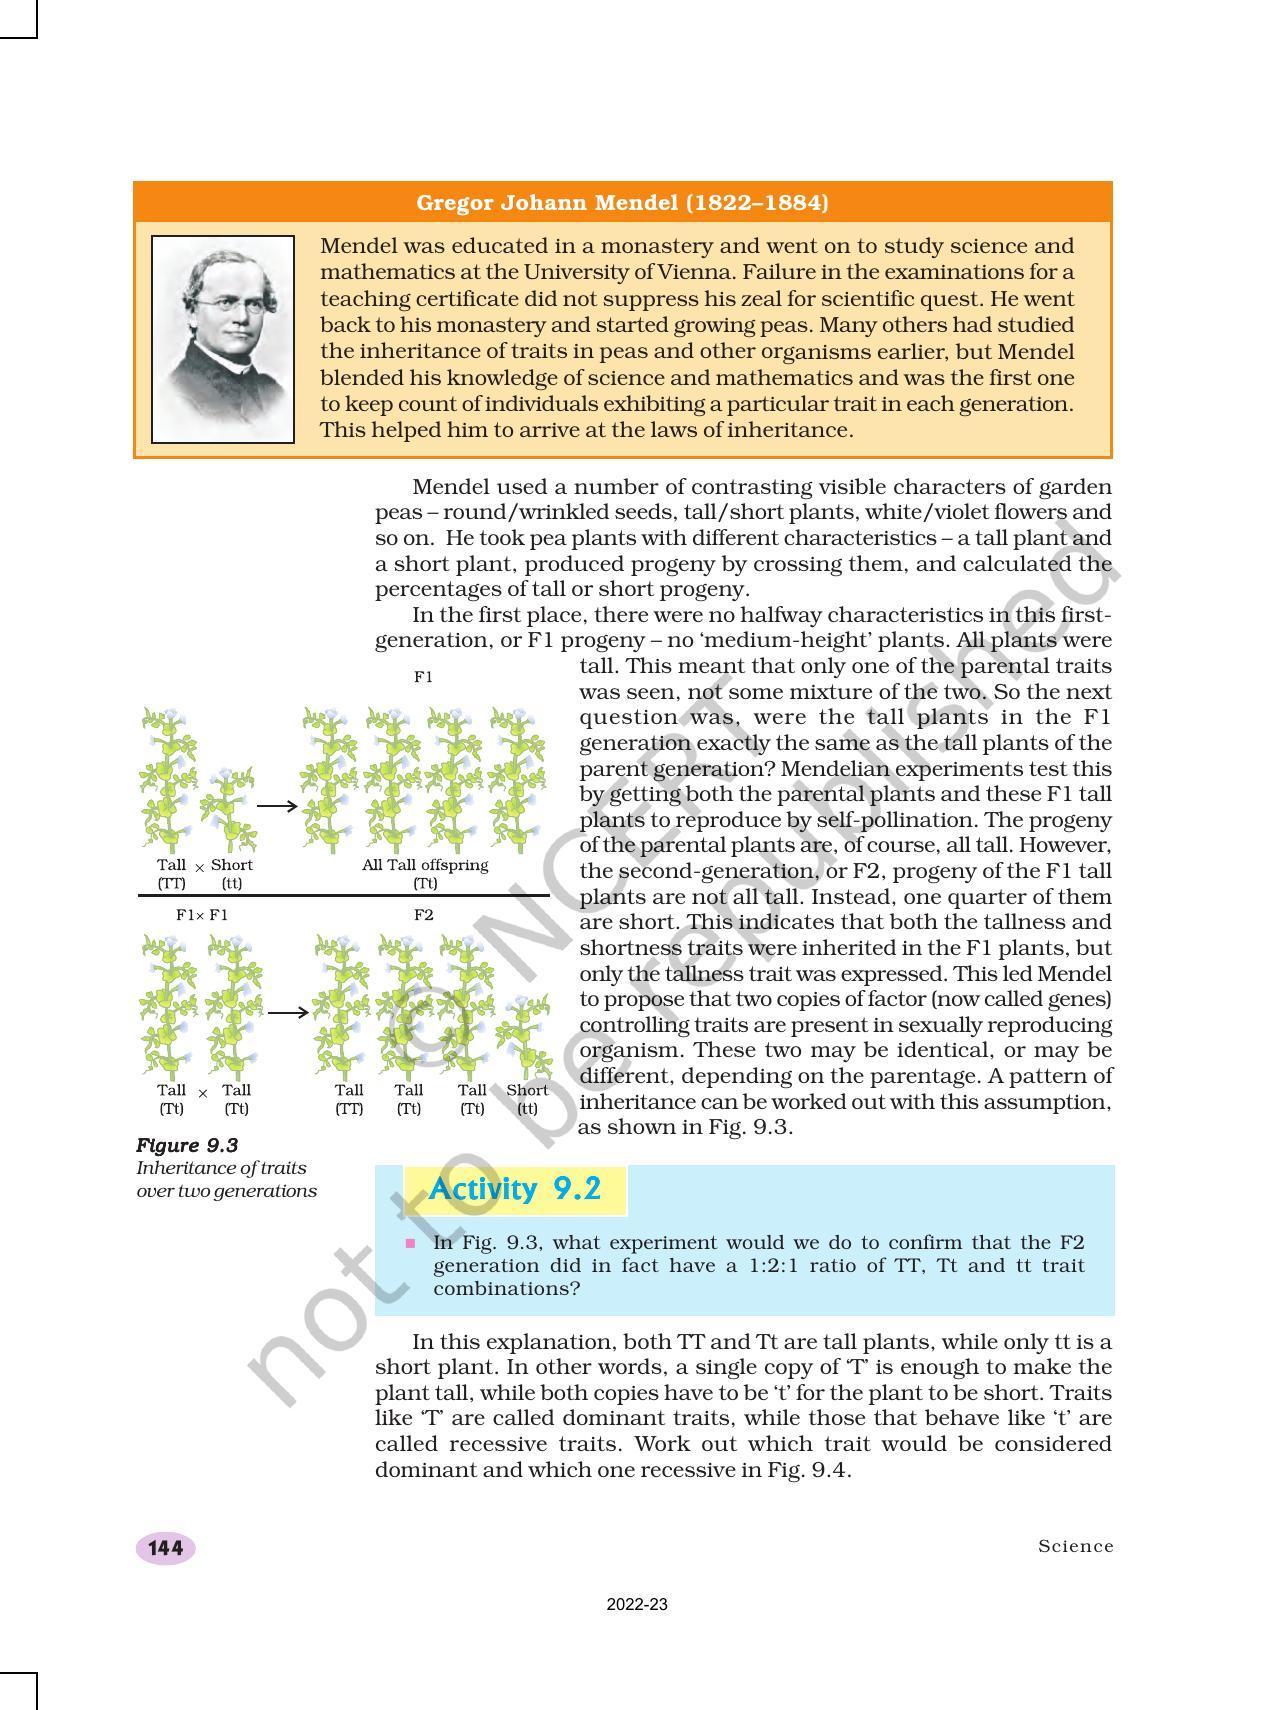 NCERT Book for Class 10 Science Chapter 9 Heredity and Evolution - Page 3